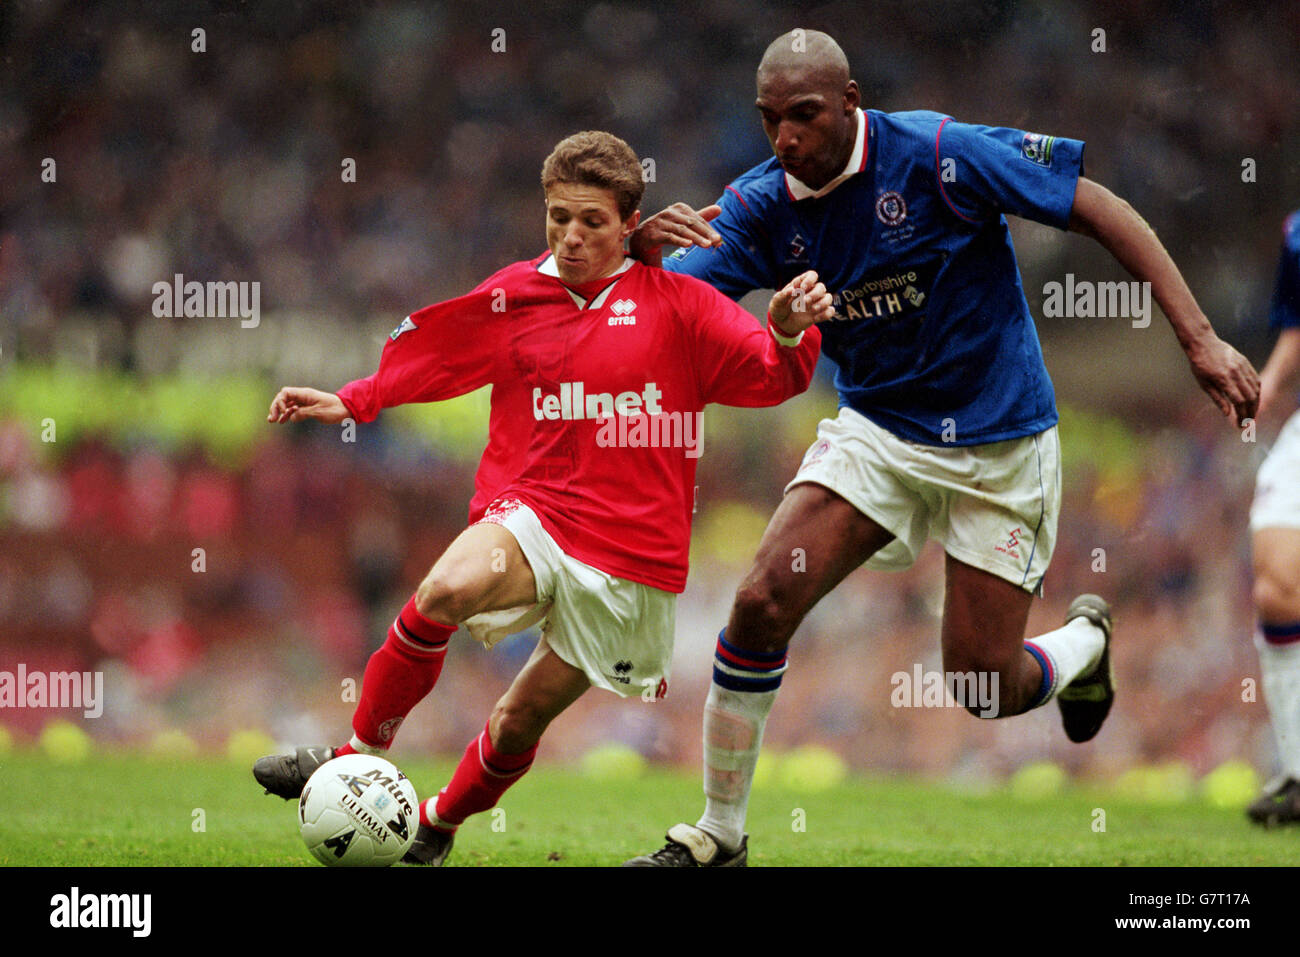 Soccer - FA Cup, Semi Final - Chesterfield v Middlesbrough. Juninho, Middlesbrough is shadowed by the enormous figure of Andy Morris, Chesterfield Stock Photo